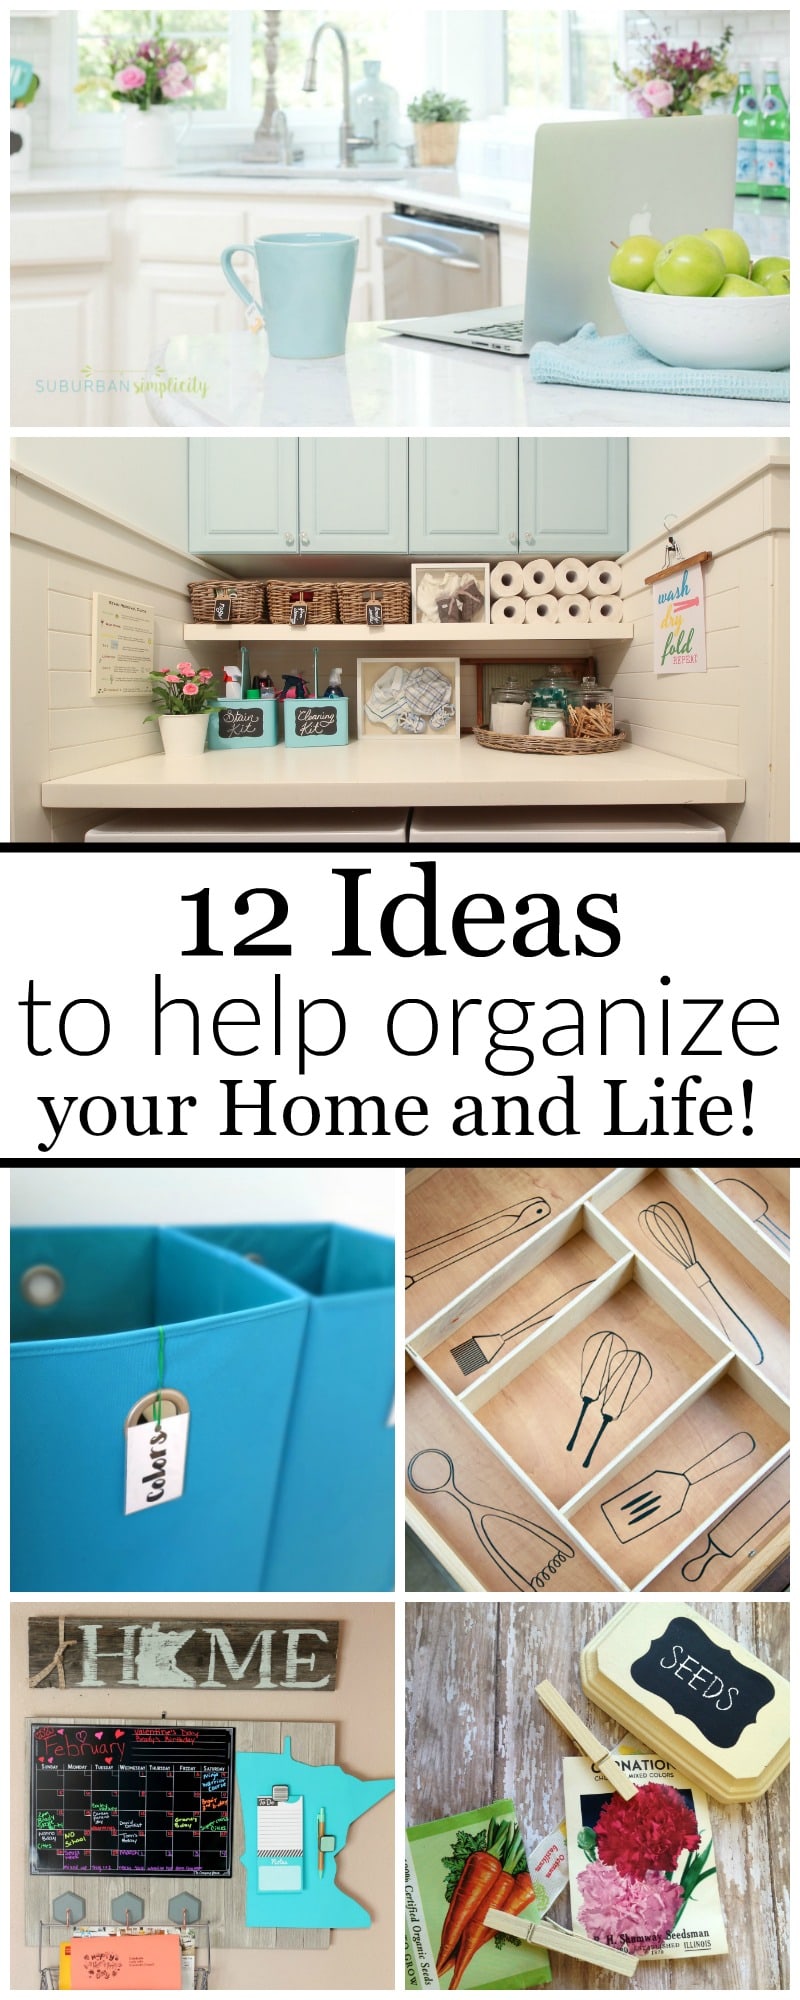 Helpful Ideas to Organize Your Home and Life